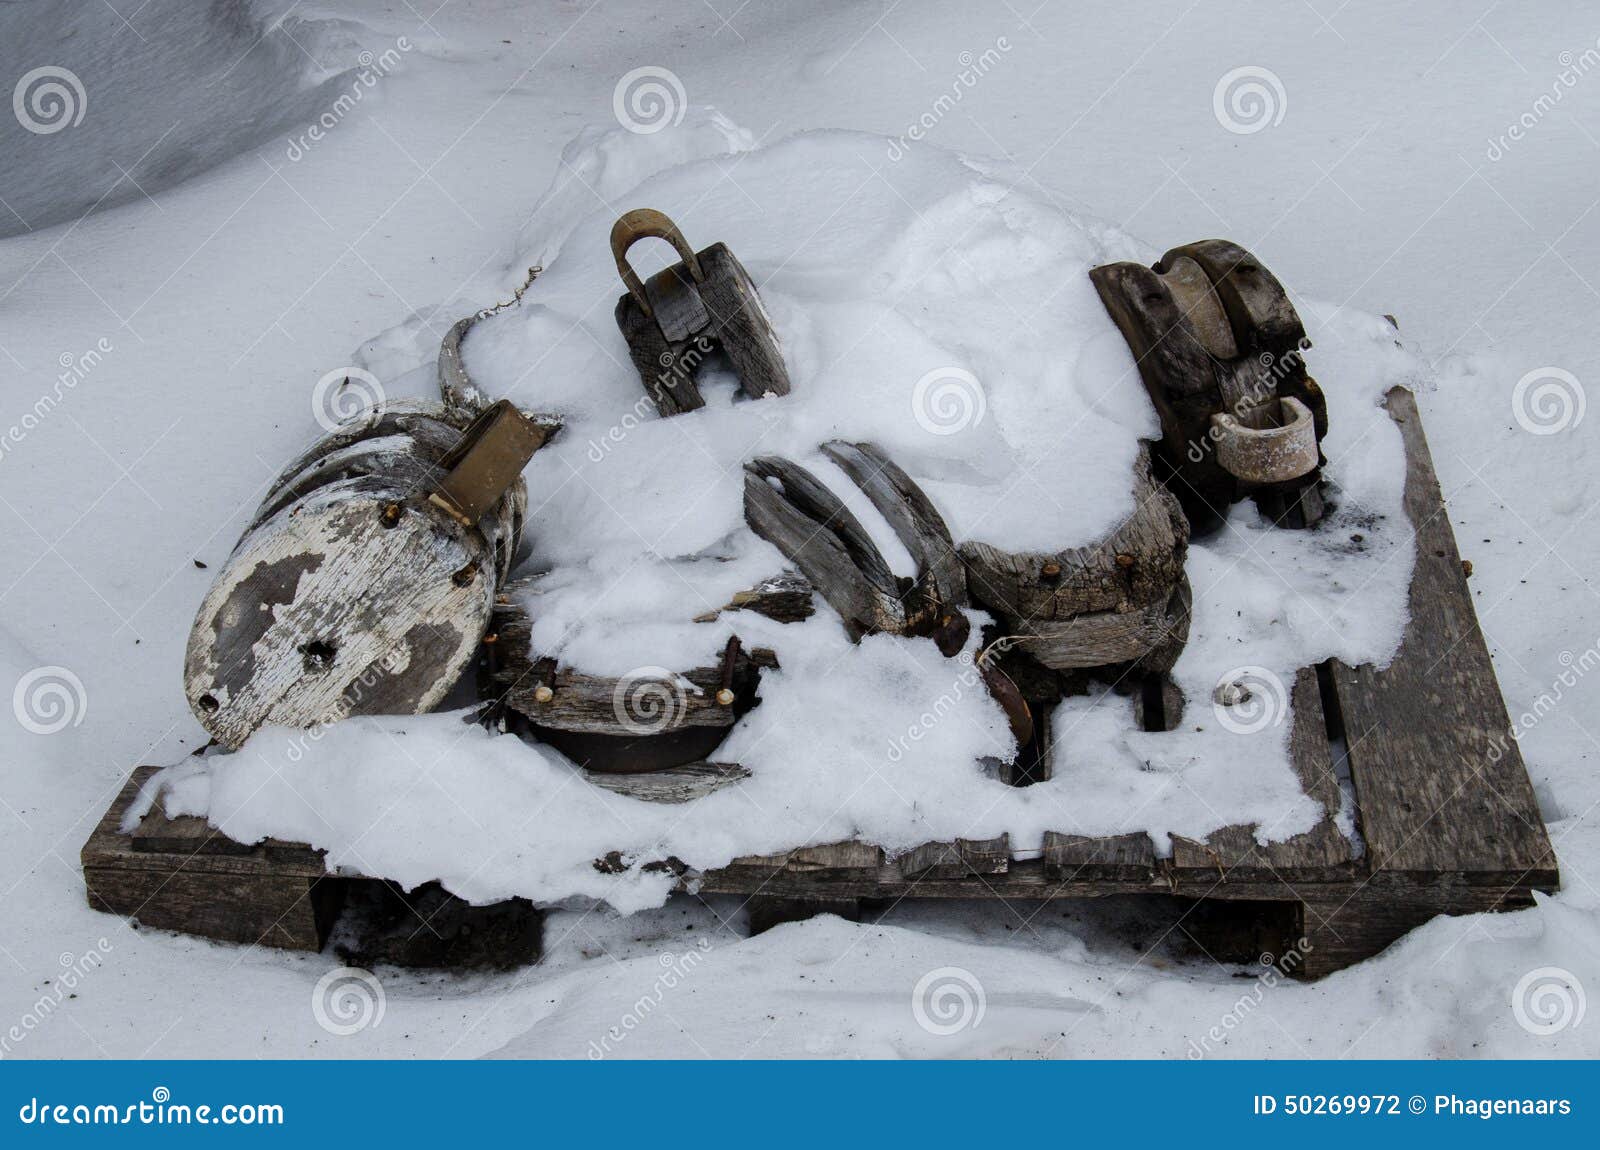 pulley blocks covered by snow